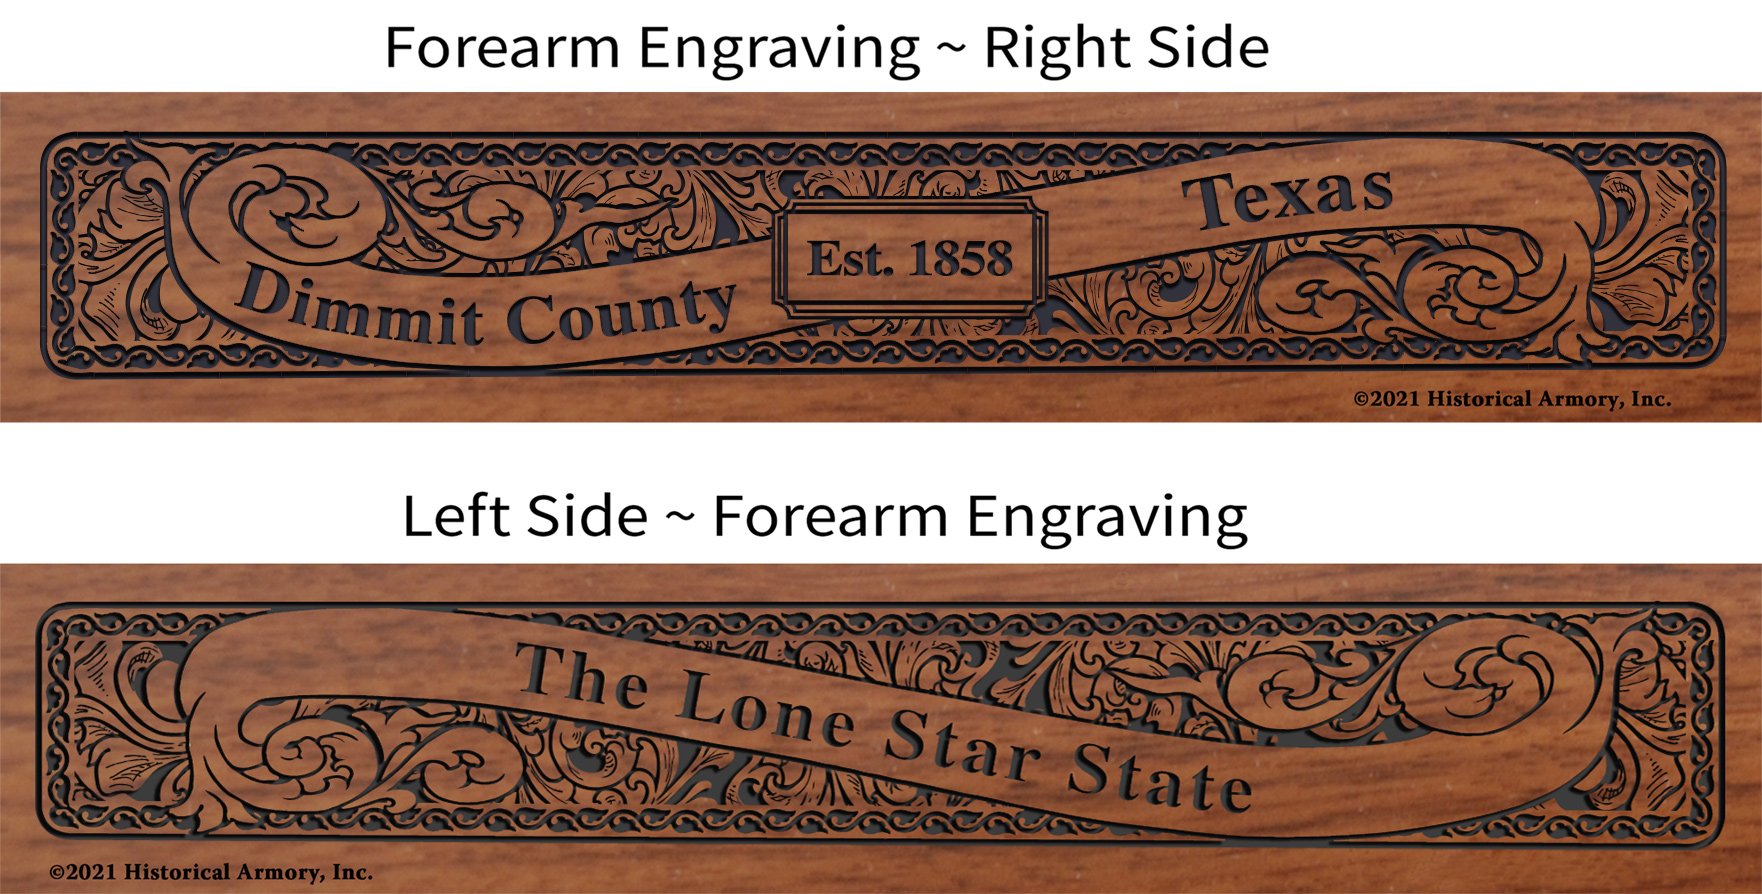 Dimmit County Texas Establishment and Motto History Engraved Rifle Forearm